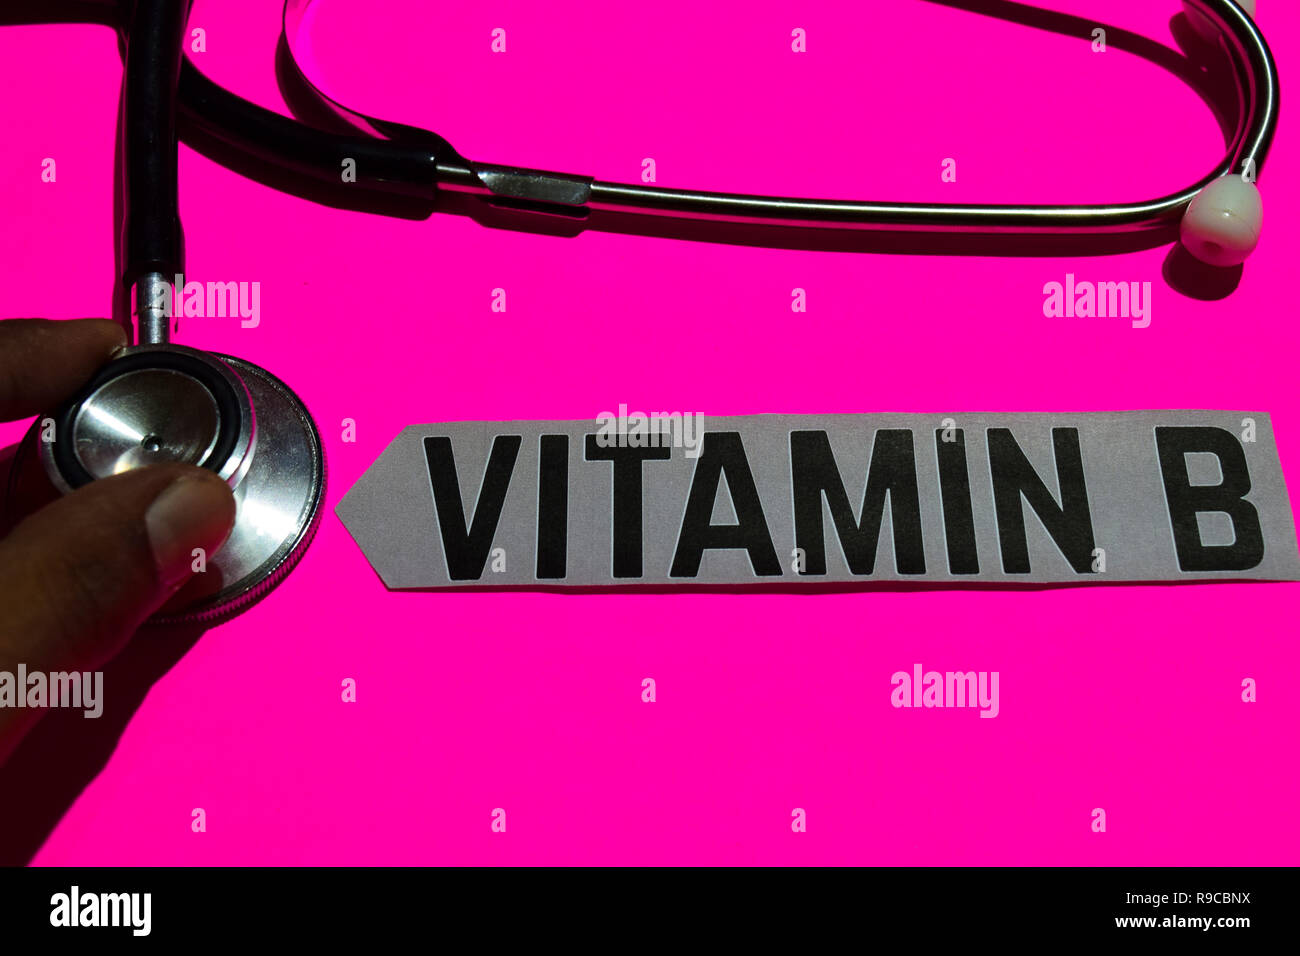 Vitamin B on the paper with healthcare concept. With stethoscope on pink bakcground Stock Photo